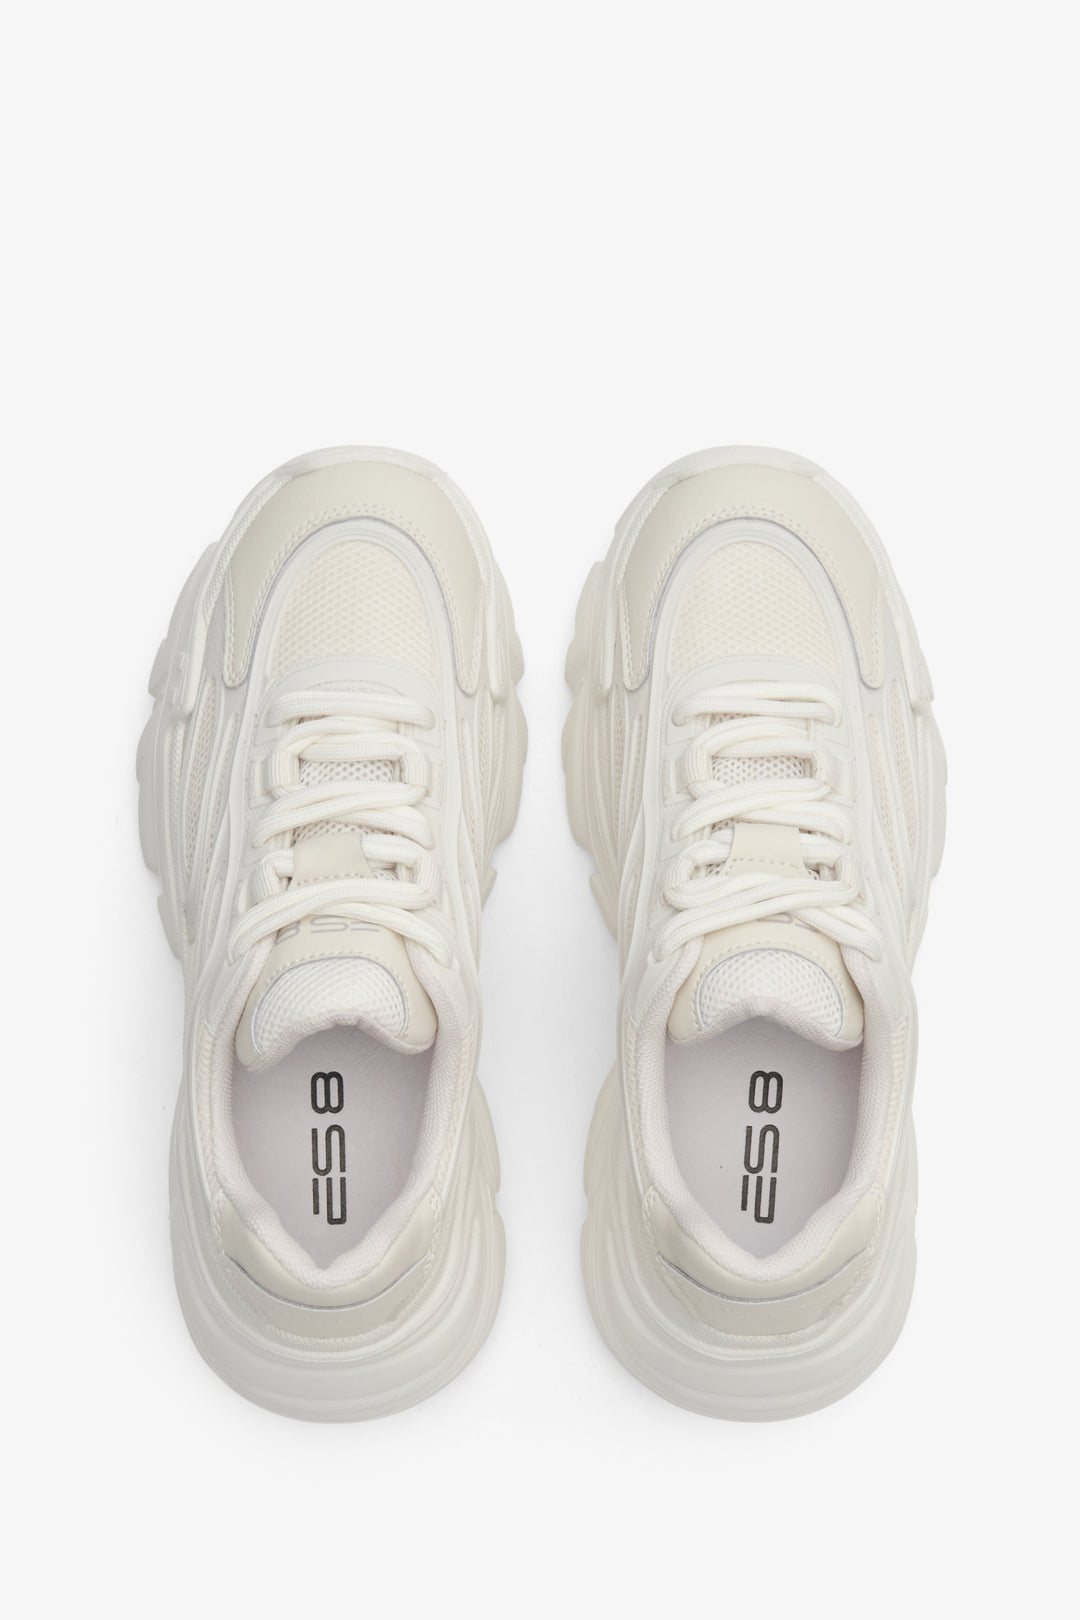 Women's light beige chunky platform sneakers ES 8 - presentation from above.